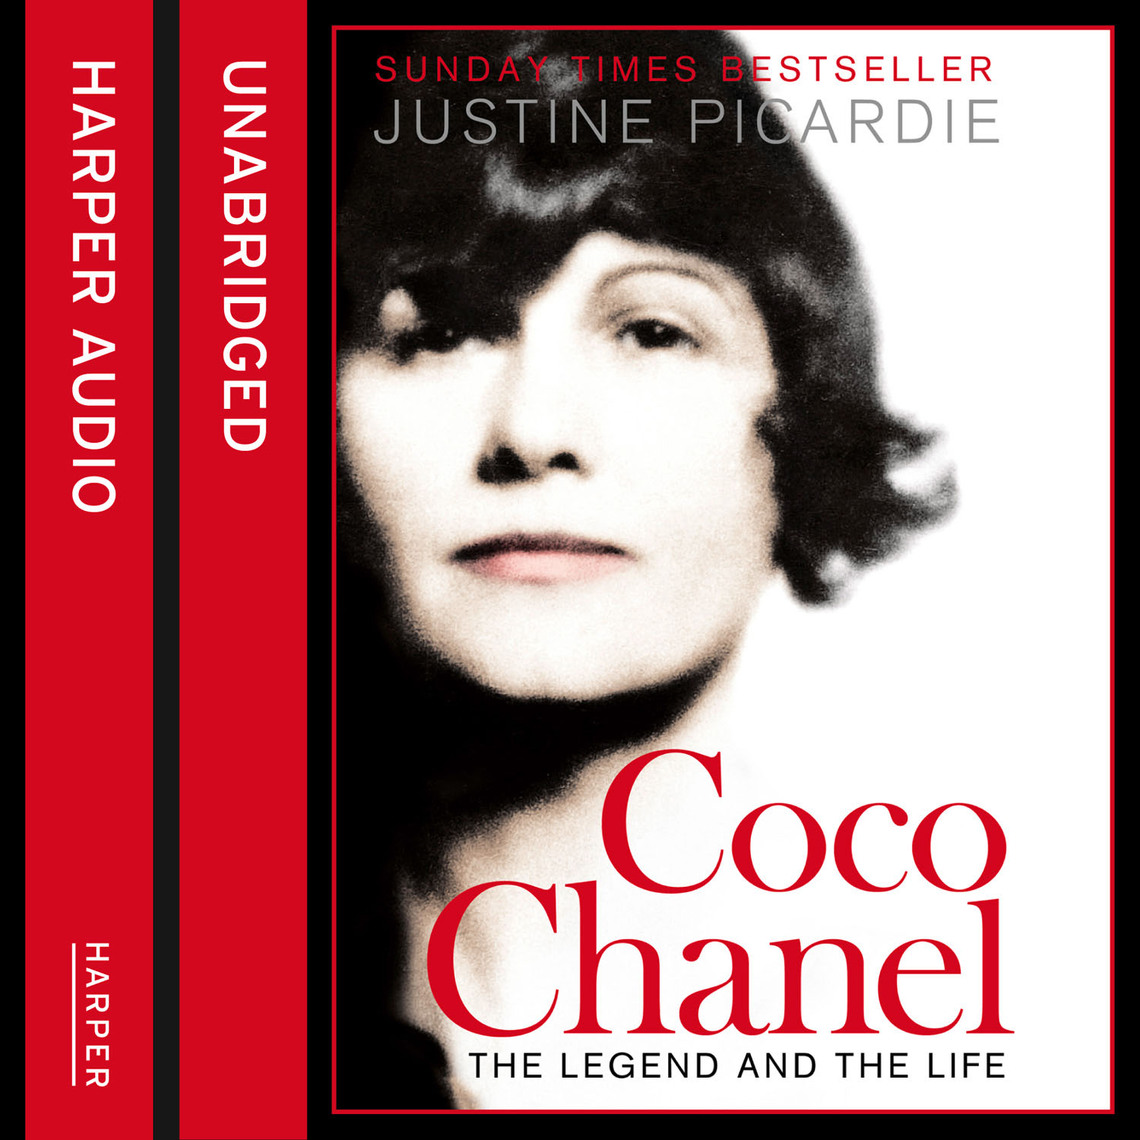 Coco Chanel by Justine Picardie - Audiobook